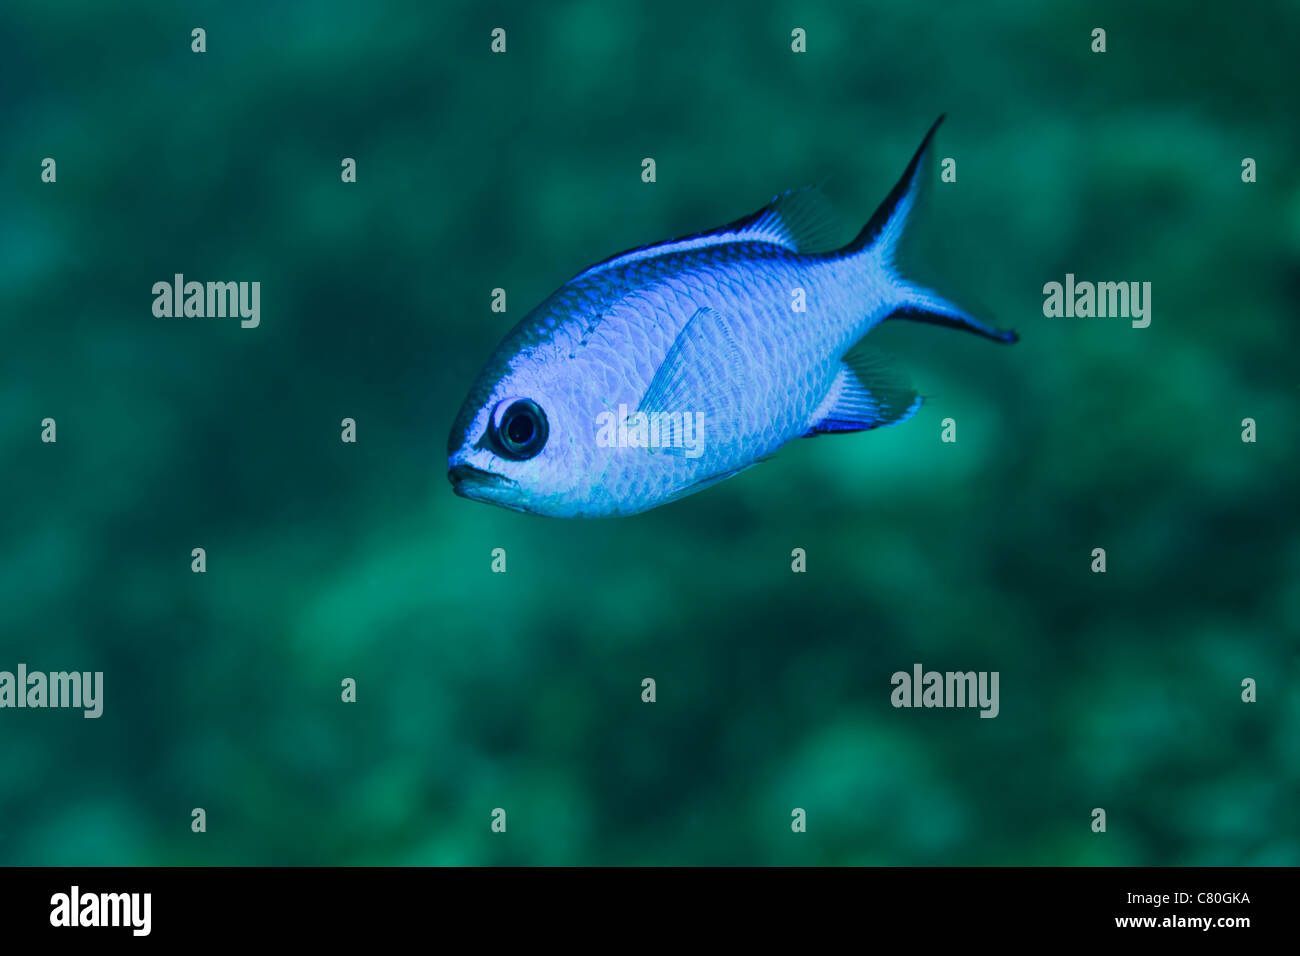 A Blue Hamlet swims in the shallow waters off the coast of Key Largo, Florida. Stock Photo